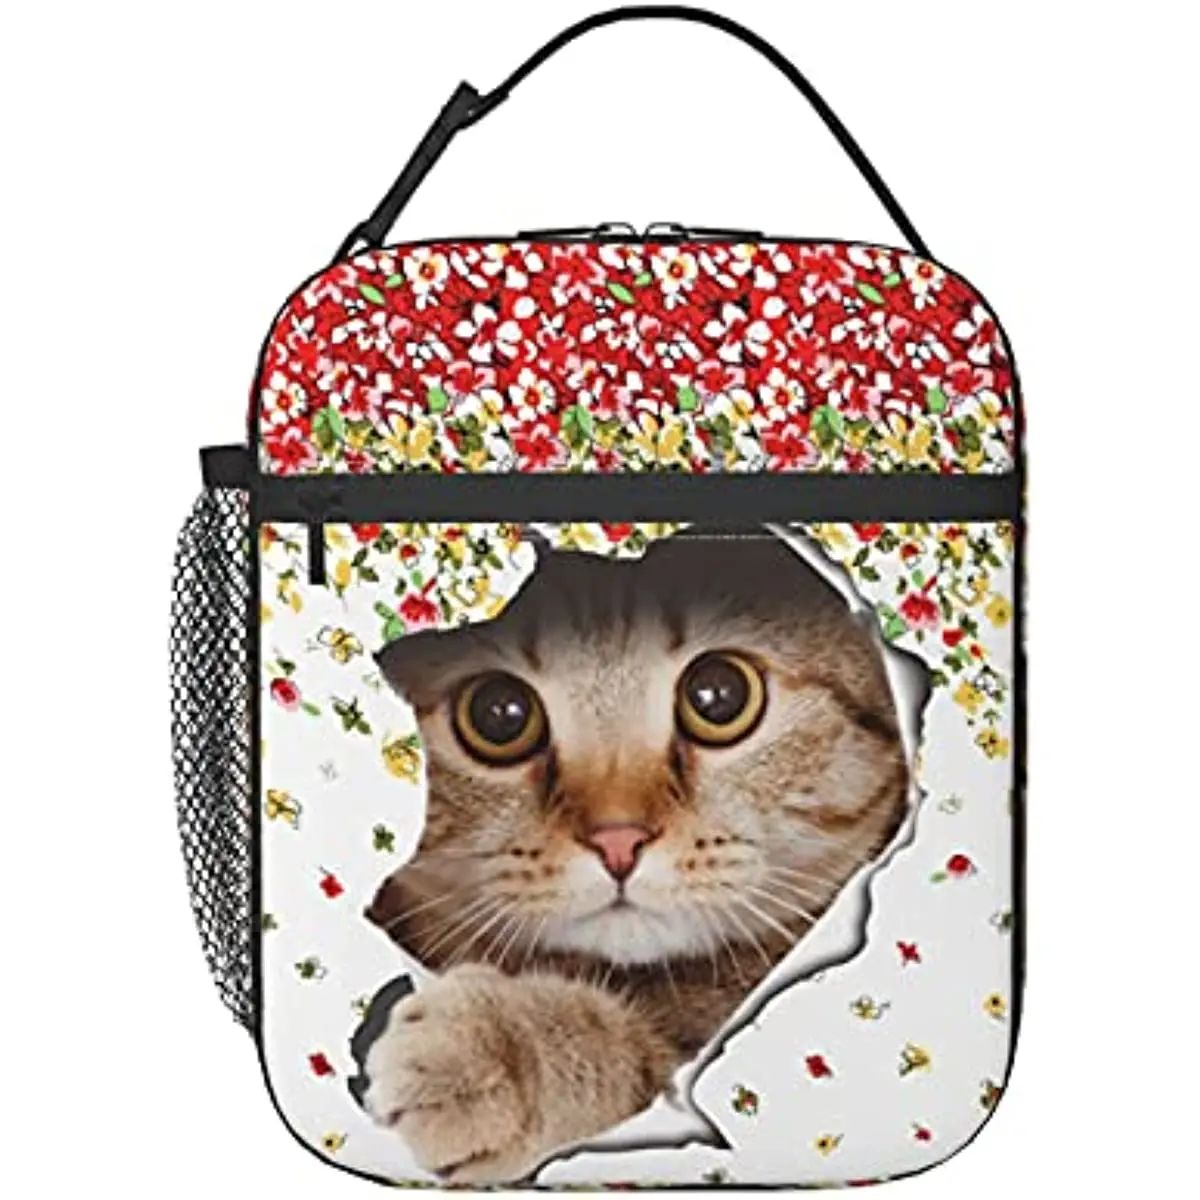 

Portable Lunch Bag 3D Cat Insulated Lunch Tote Bag Cooler Thermal Lunchboxes for Travel Picnic Work Lunch Bags for Children